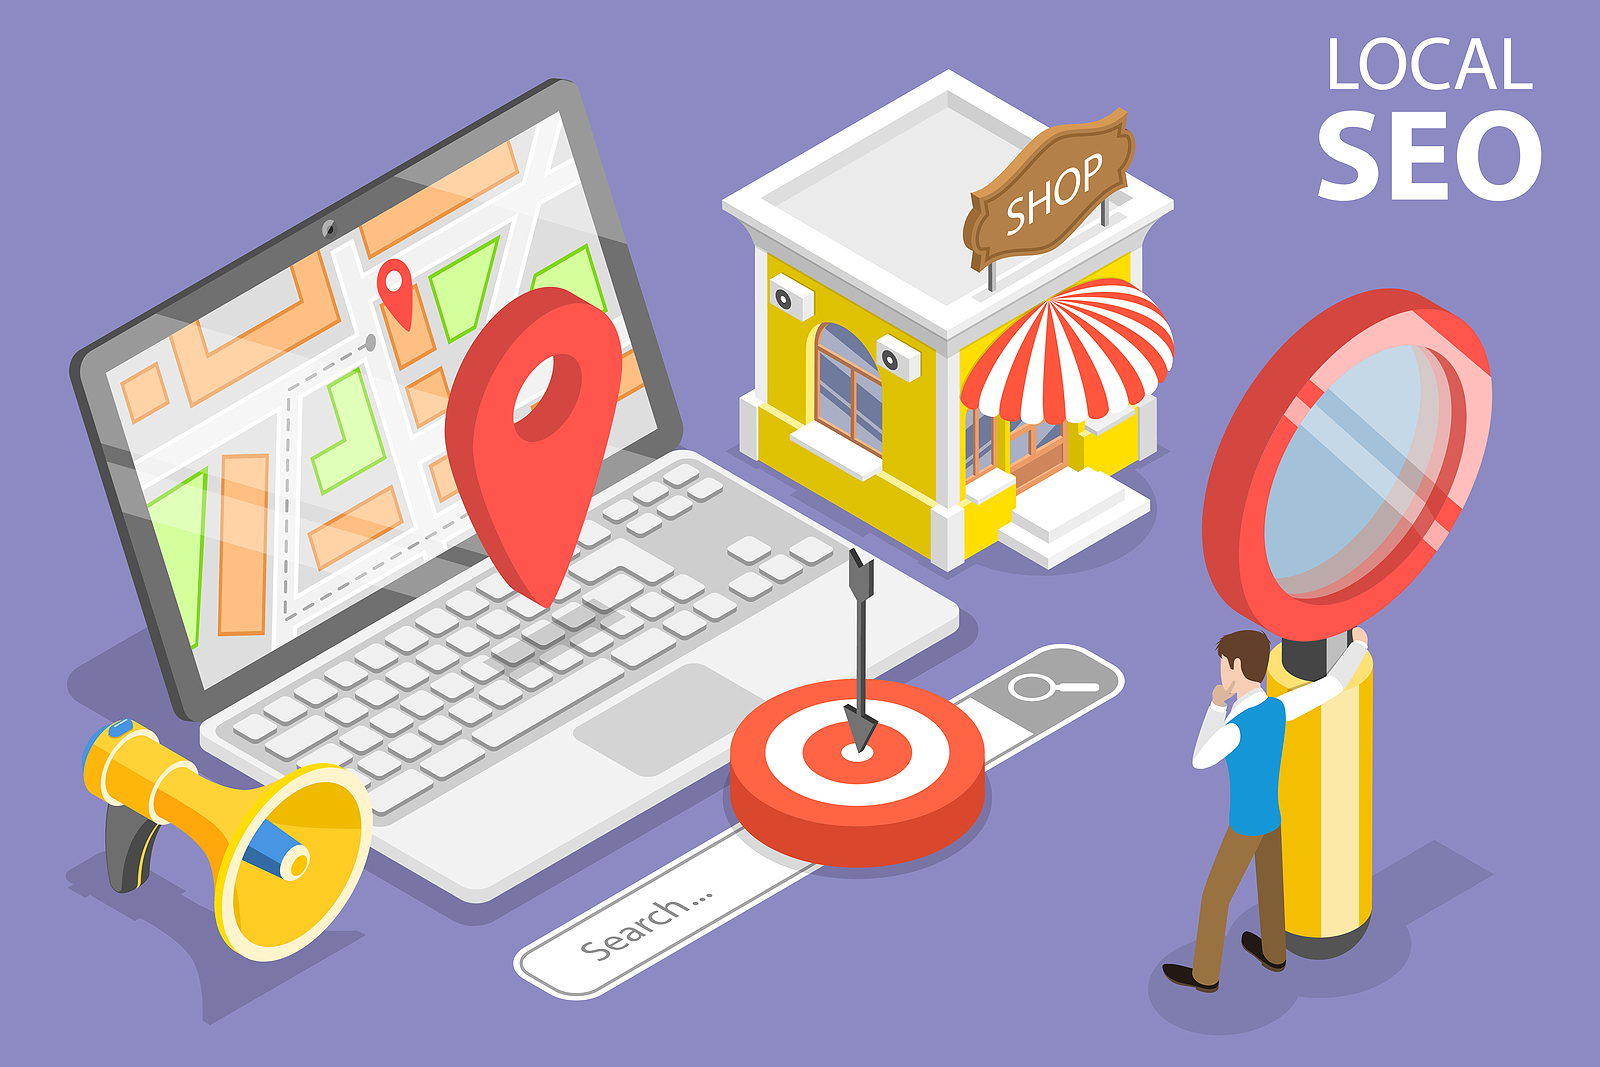 LOCAL SEO FOR BUSINESS